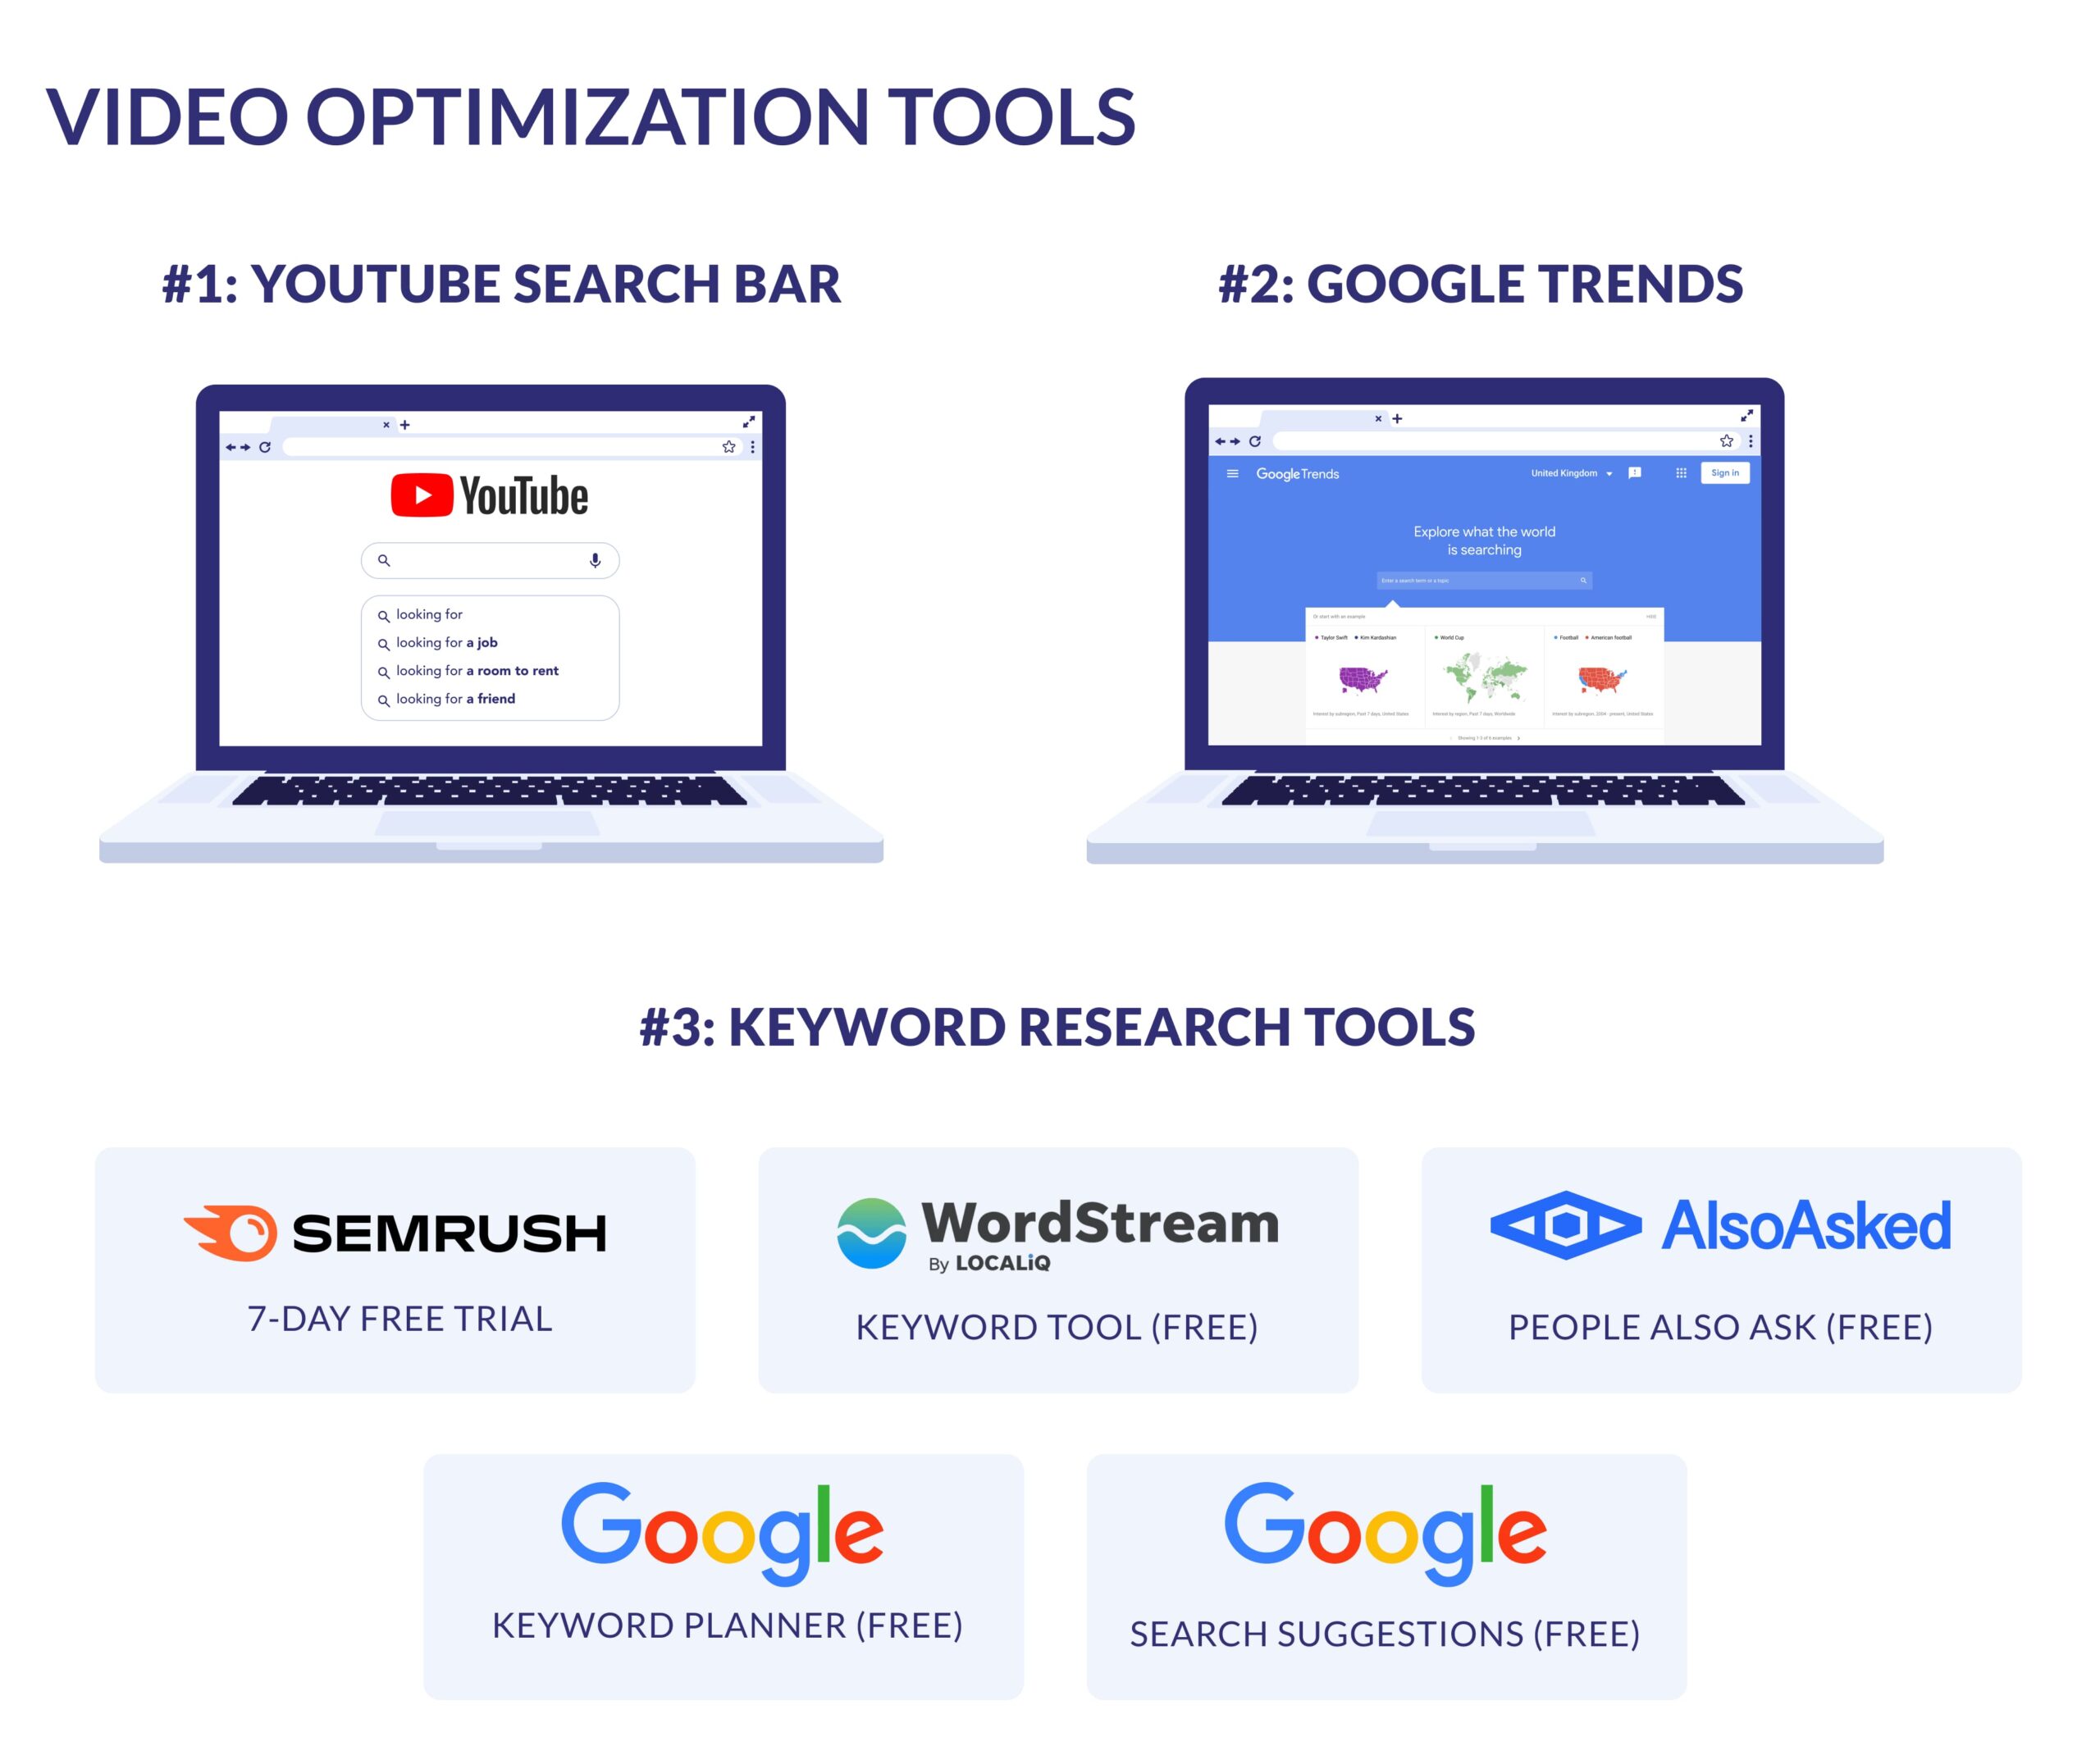 Video optimization tools, including YouTube search bar, Google Trends, and examples of keyword research tools